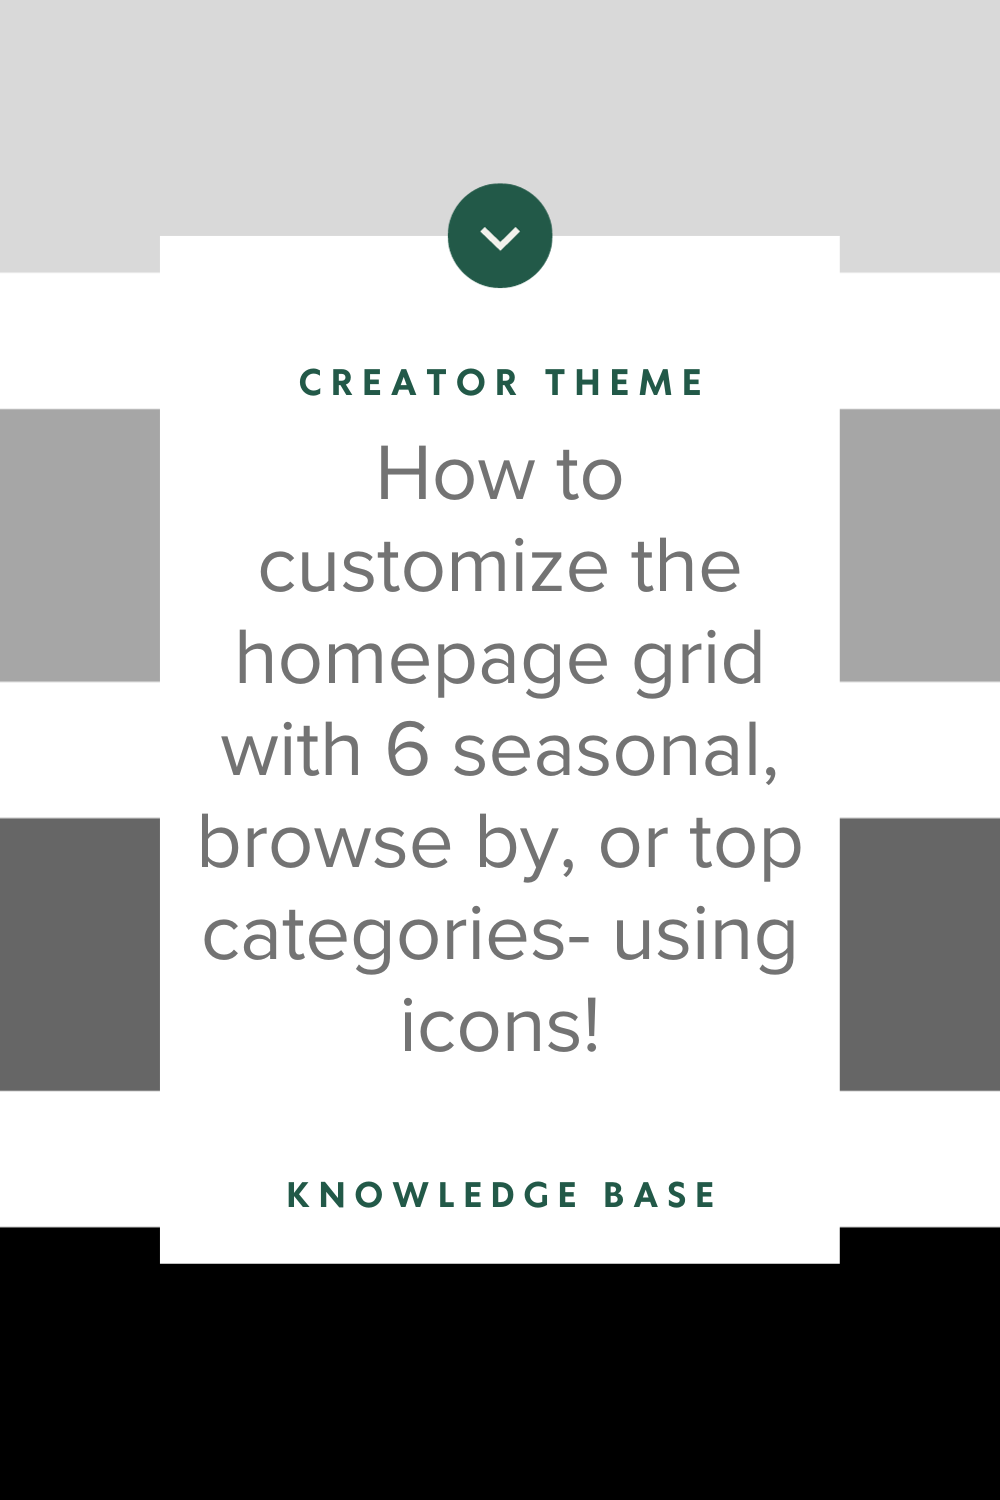 How to customize the homepage grid using icons!